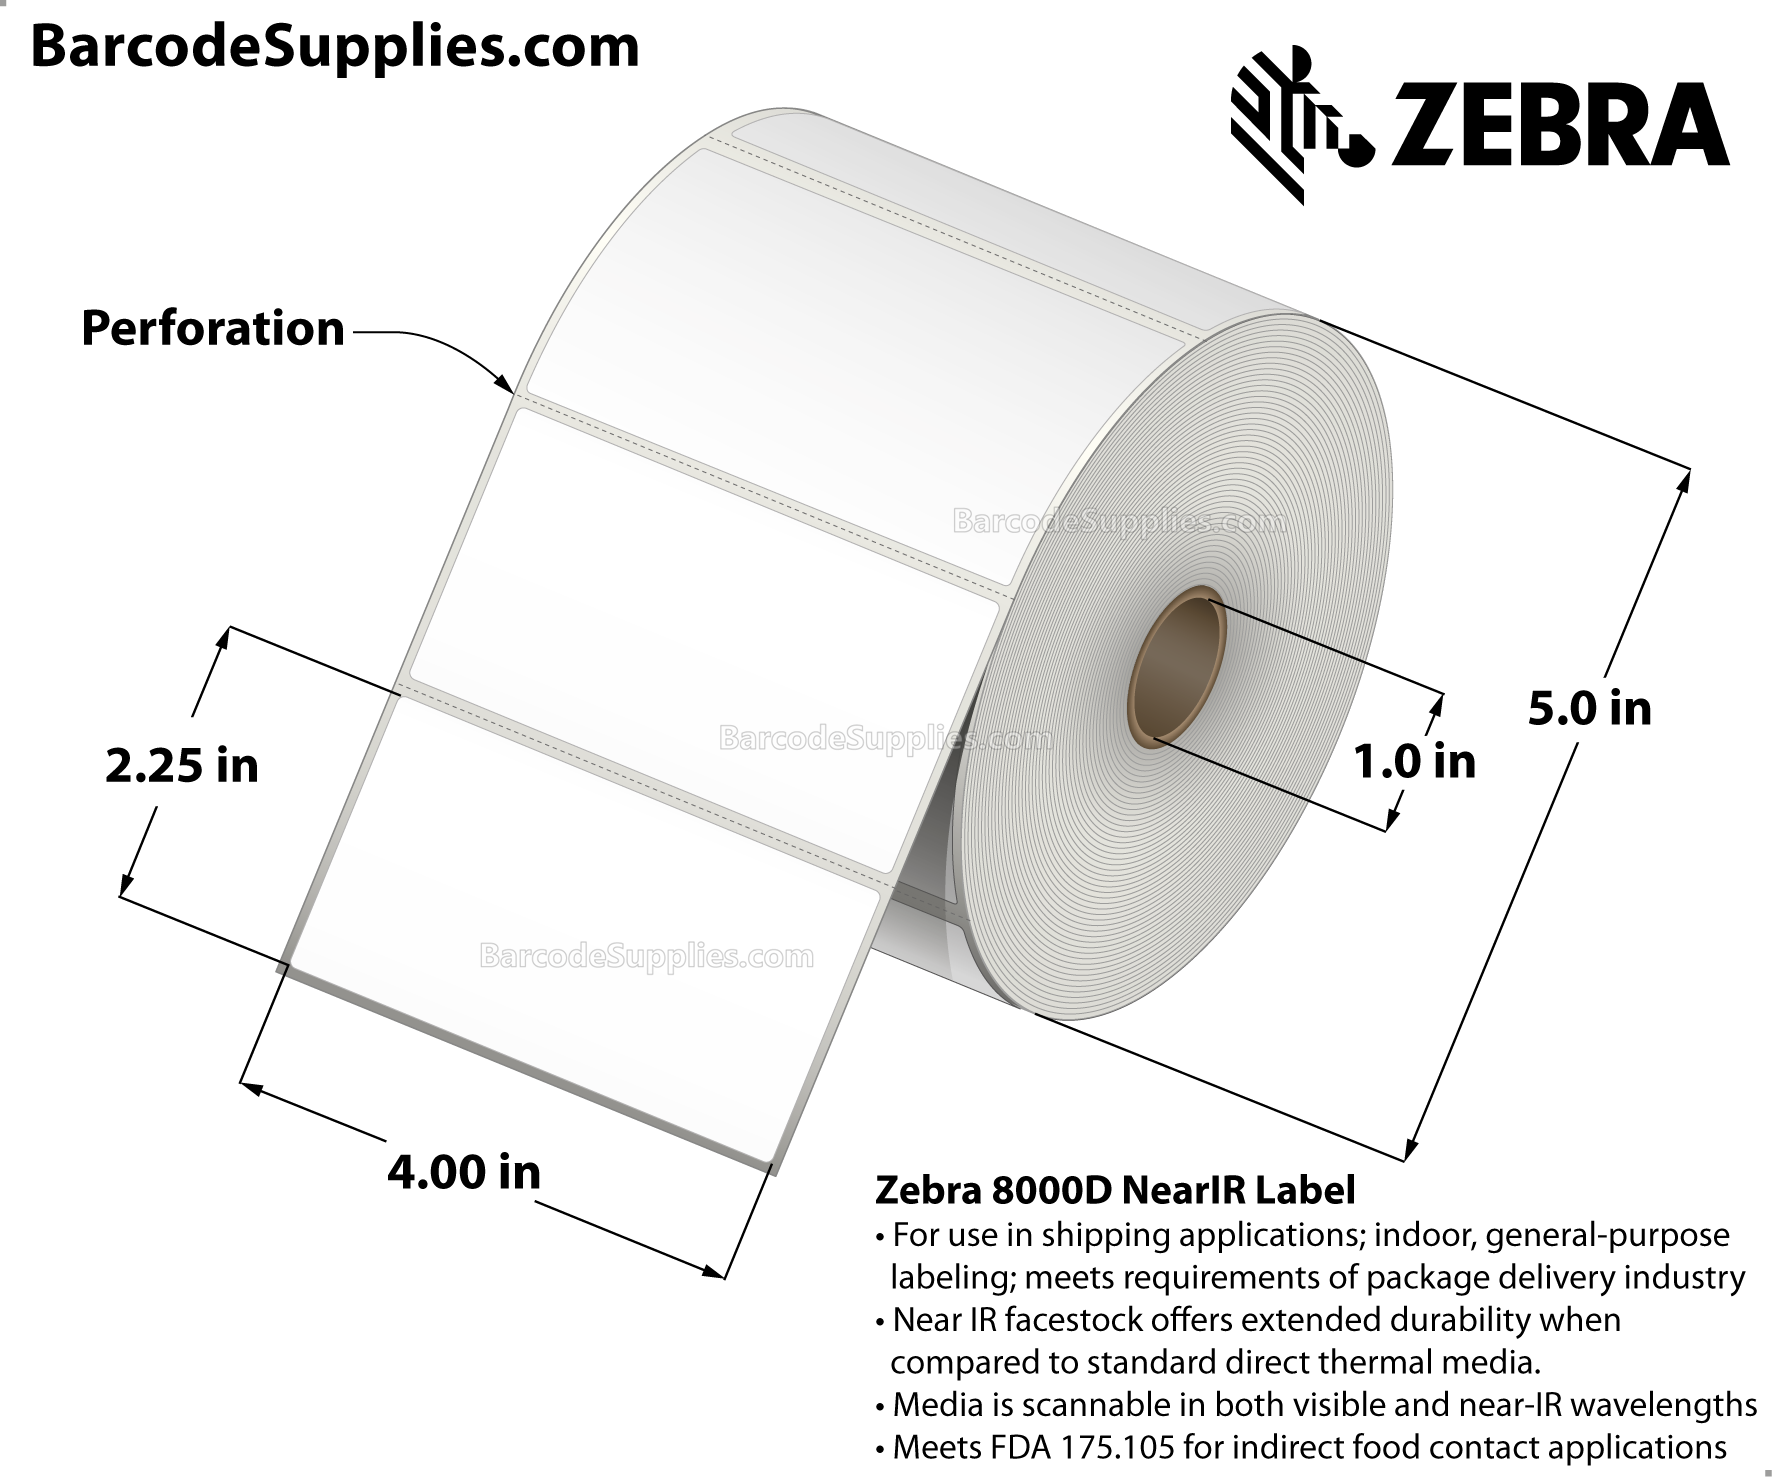 4 x 2.25 Direct Thermal White 8000D Near-IR (Parcel Shipping Label) Labels With Permanent Adhesive - Perforated - 1060 Labels Per Roll - Carton Of 4 Rolls - 4240 Labels Total - MPN: 10010059